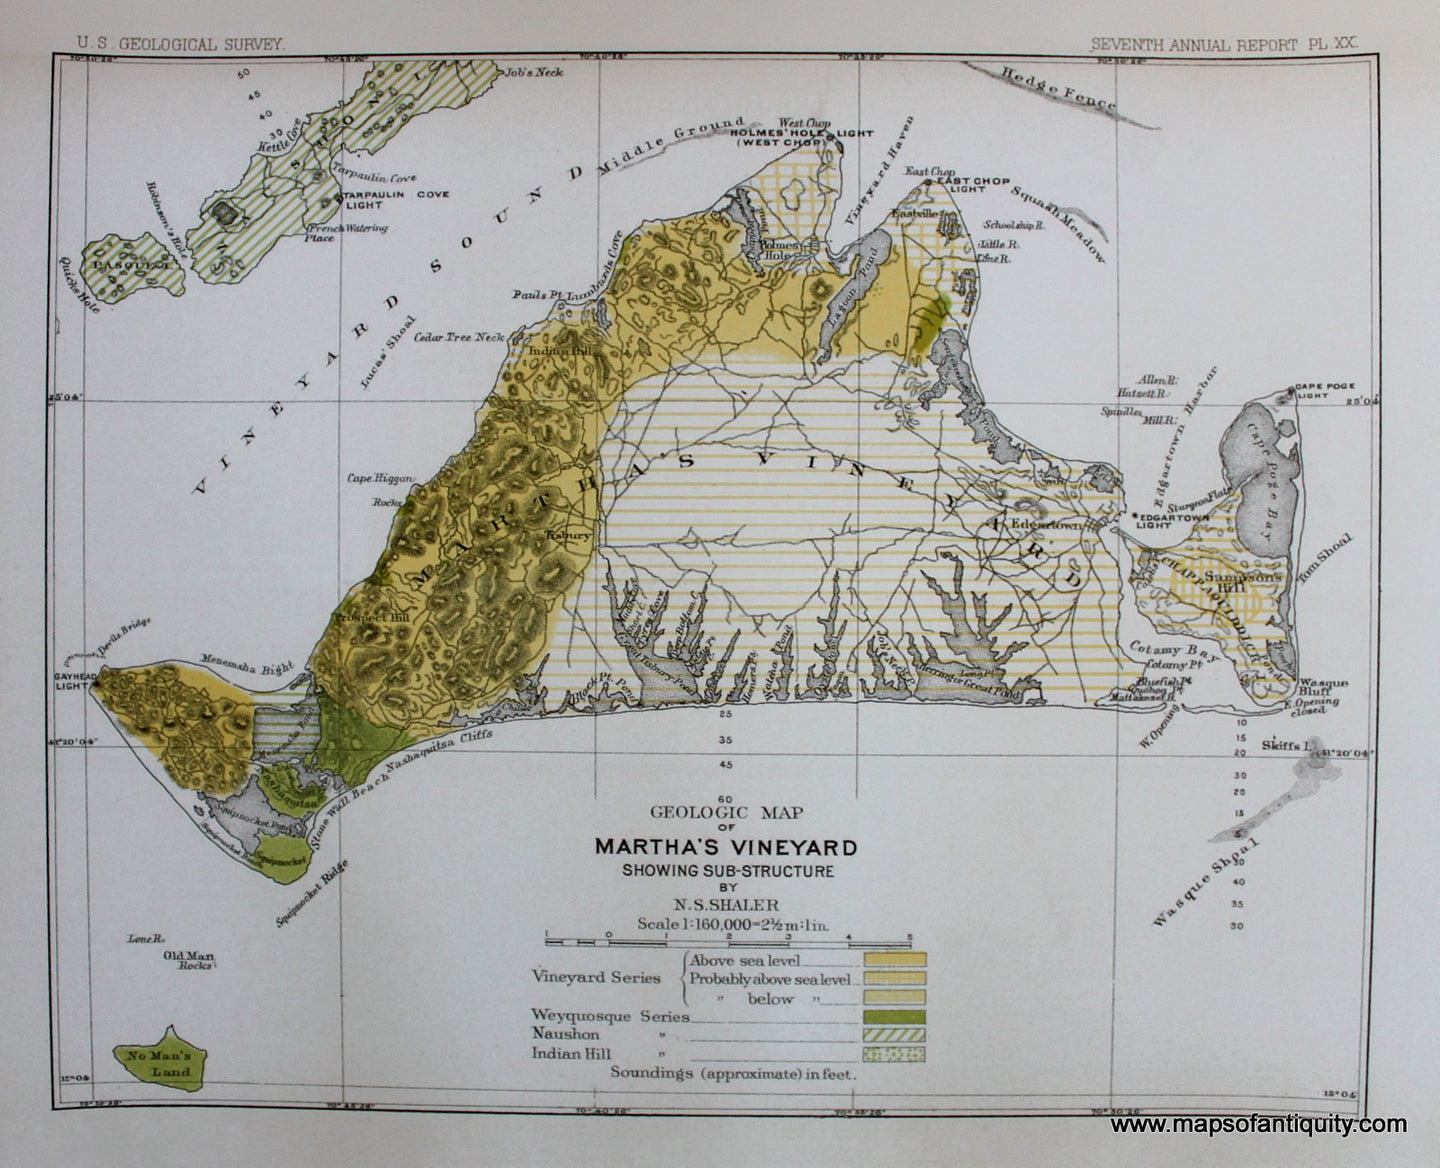 Reproduction-Map-of-Martha's-Vineyard-Showing-Sub-Structure-by-N.S.-Shaler---Reproduction---Reproductions-Cape-Cod-and-Islands-Reproduction-US-Geological-Survey-Maps-Of-Antiquity